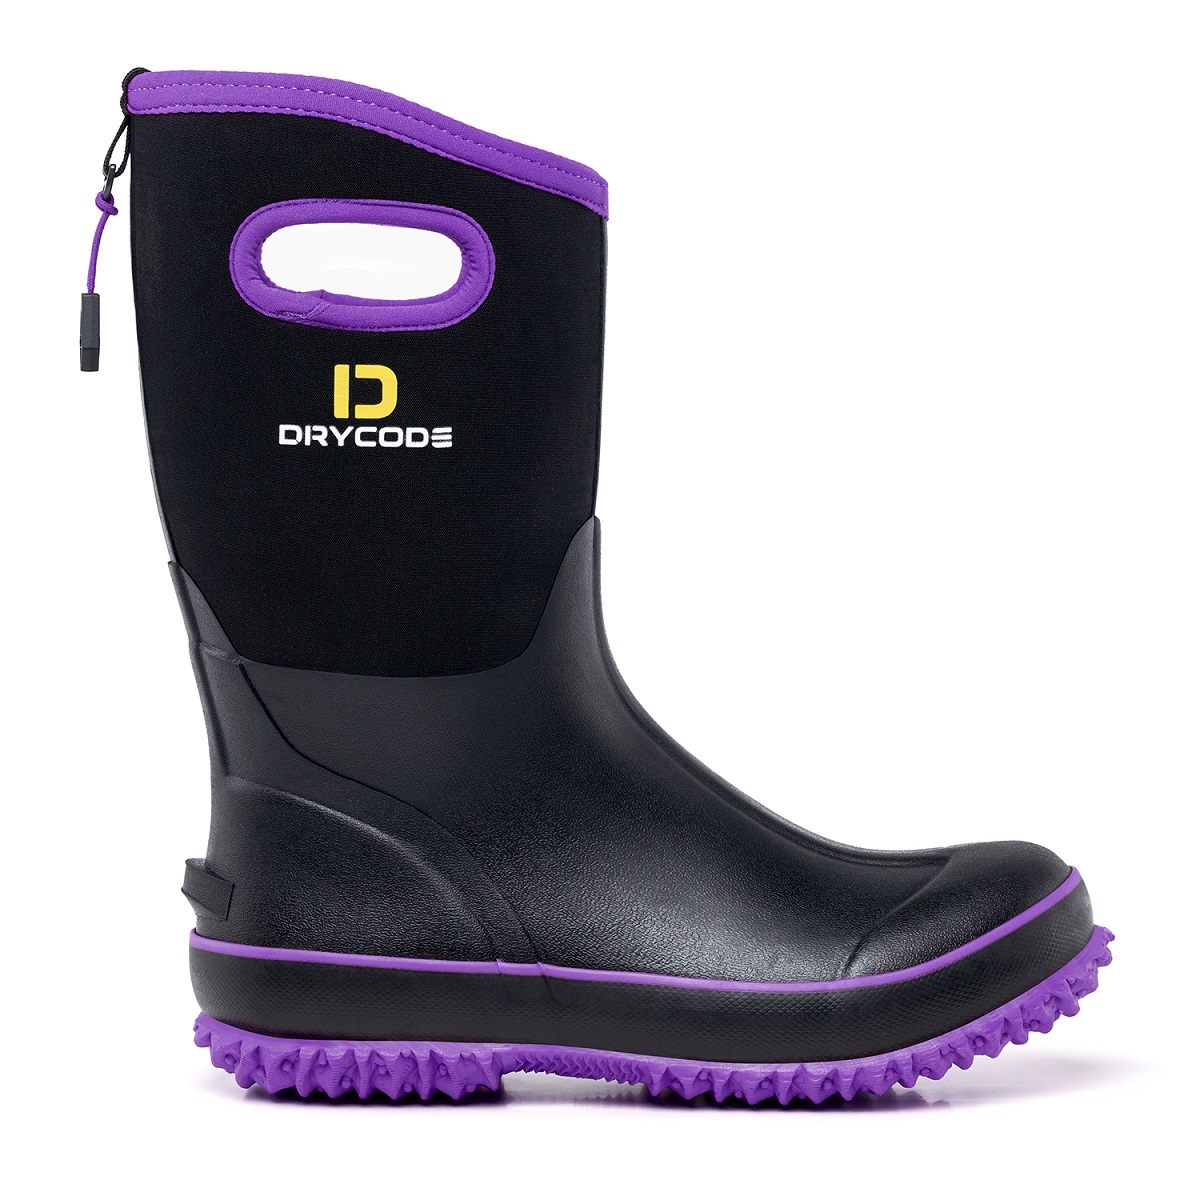 DRYCODE Rubber Boots (Purple) for Women's Gardening Farming